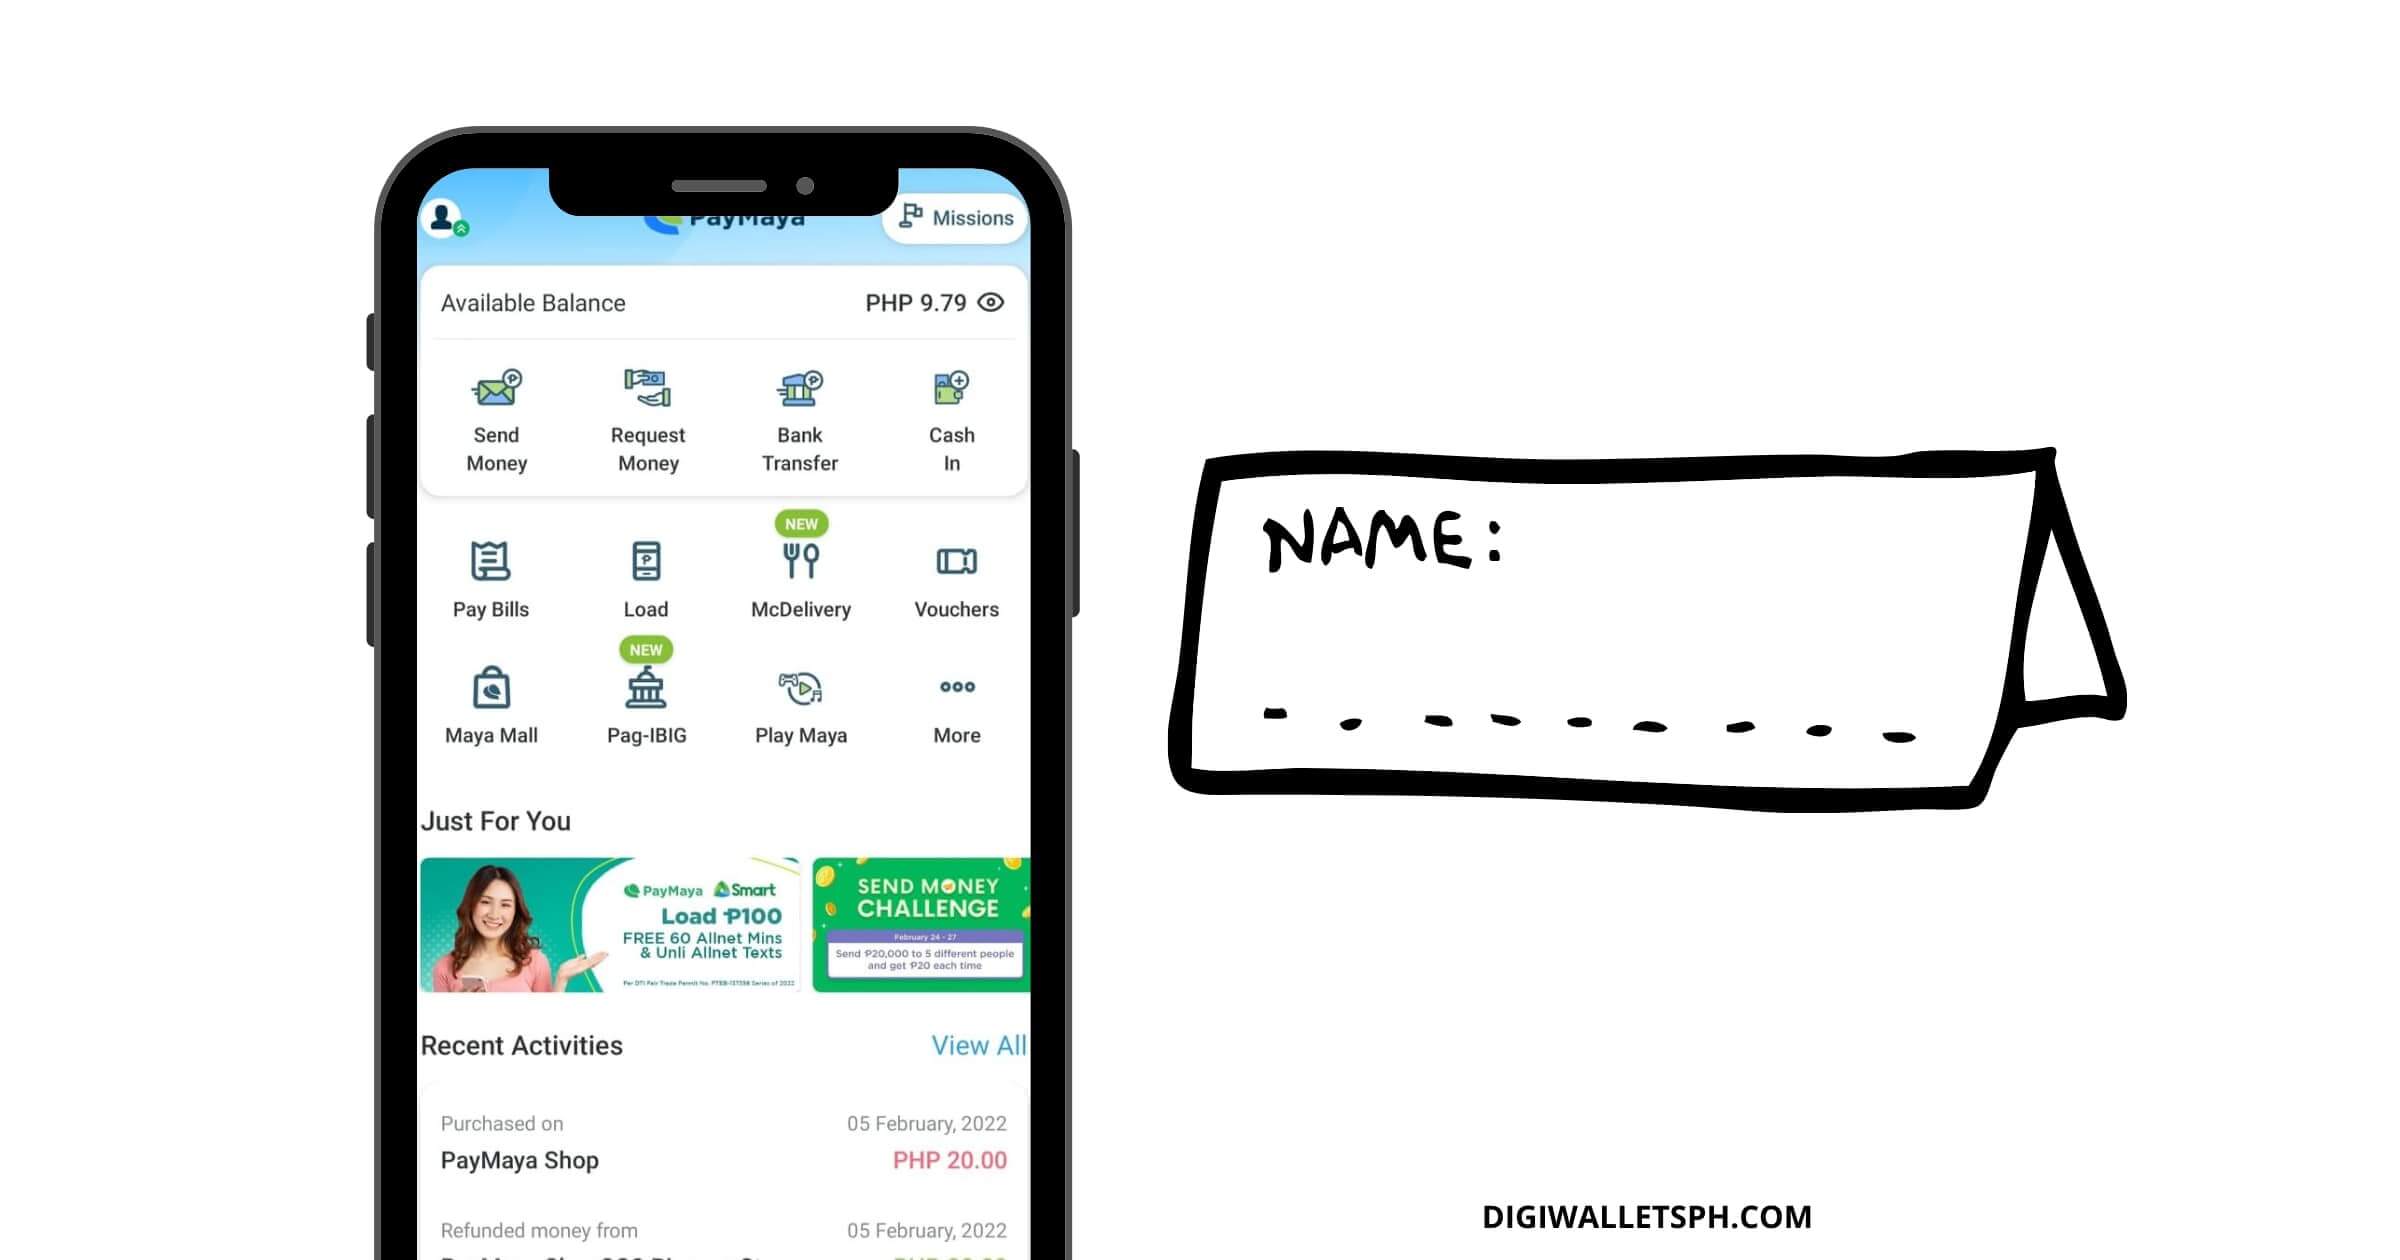 How to change name in Paymaya